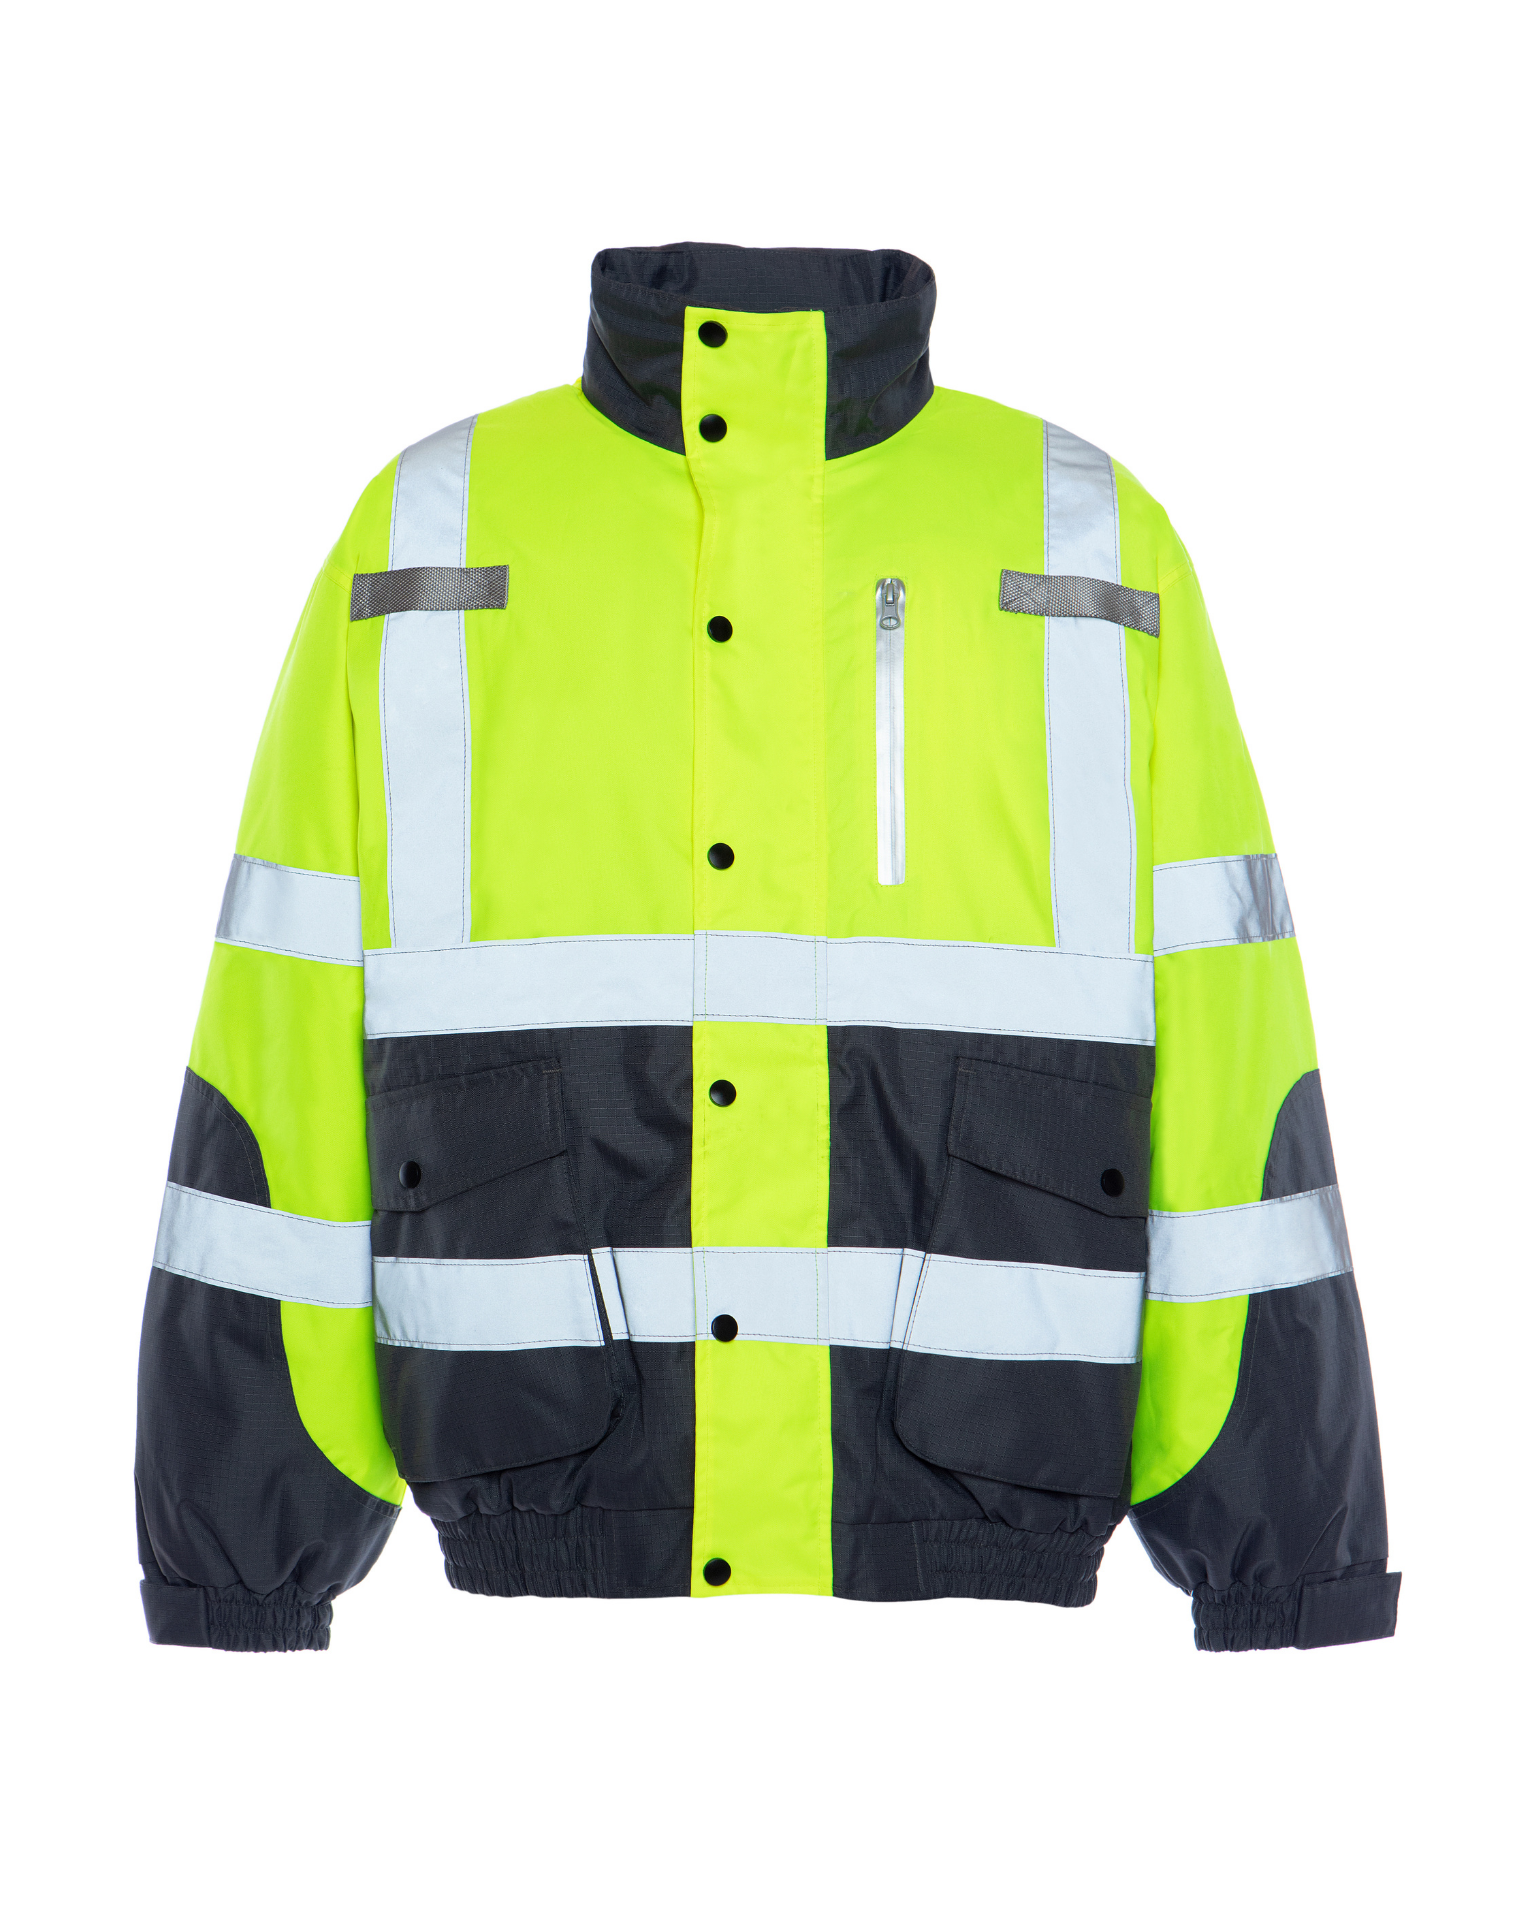 ANSI Class 3 High Visibility removable heat-reflective lining abraision-resistant inserts liquid and stain repellency 3-in-1 jacket by Utility Pro